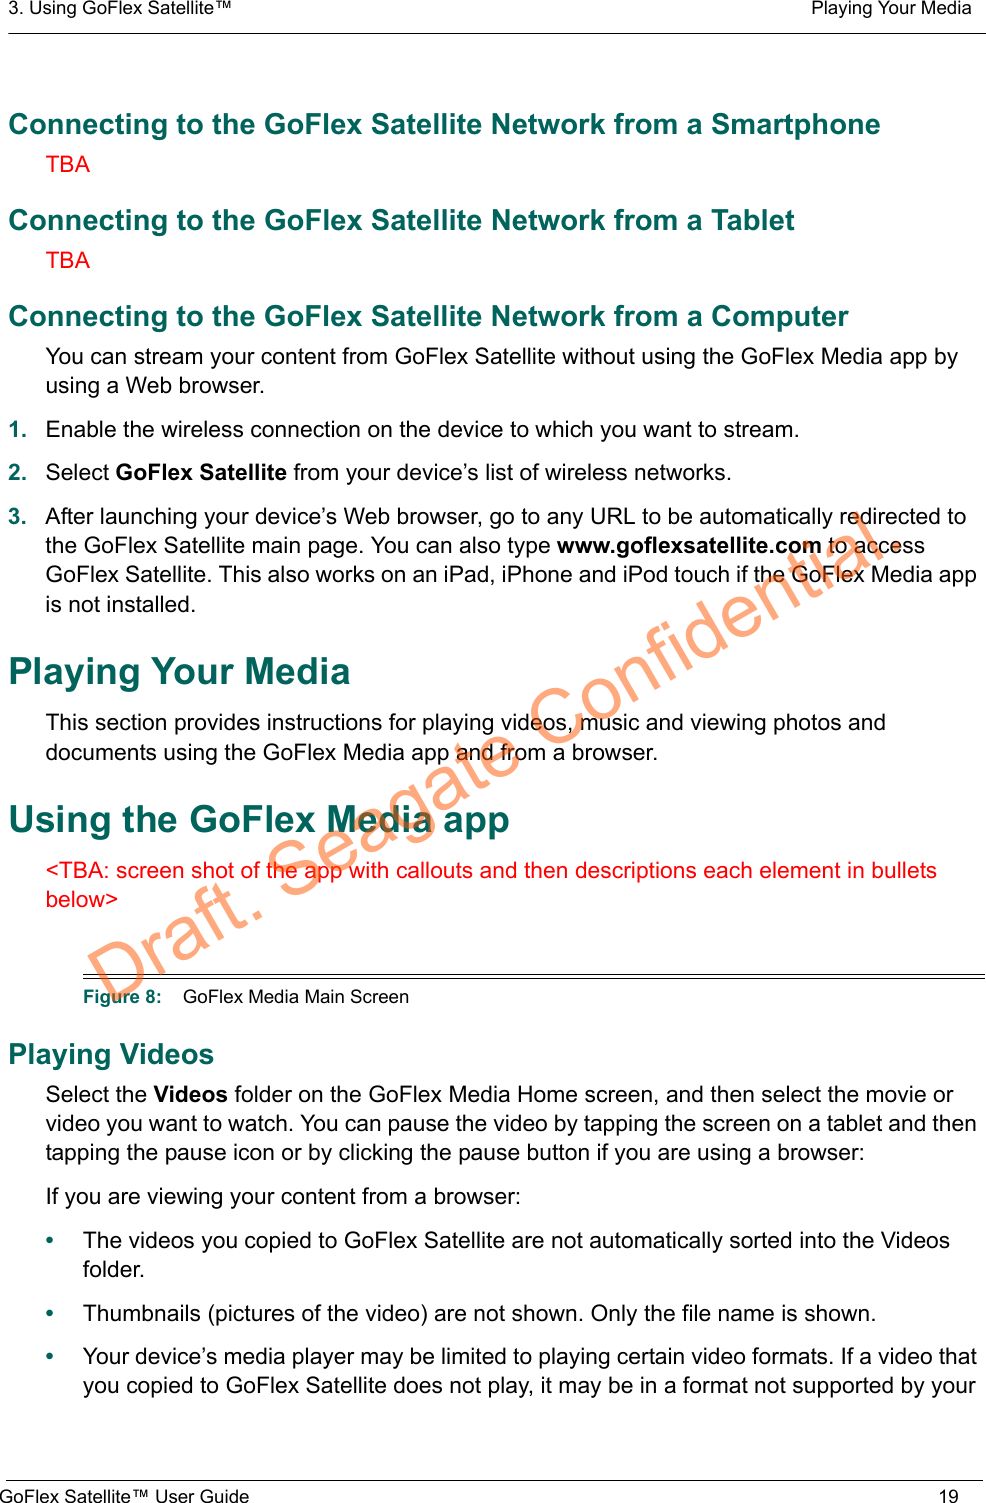 3. Using GoFlex Satellite™  Playing Your MediaGoFlex Satellite™ User Guide 19Connecting to the GoFlex Satellite Network from a SmartphoneTBAConnecting to the GoFlex Satellite Network from a TabletTBAConnecting to the GoFlex Satellite Network from a ComputerYou can stream your content from GoFlex Satellite without using the GoFlex Media app by using a Web browser.1. Enable the wireless connection on the device to which you want to stream.2. Select GoFlex Satellite from your device’s list of wireless networks.3. After launching your device’s Web browser, go to any URL to be automatically redirected to the GoFlex Satellite main page. You can also type www.goflexsatellite.com to access GoFlex Satellite. This also works on an iPad, iPhone and iPod touch if the GoFlex Media app is not installed.Playing Your MediaThis section provides instructions for playing videos, music and viewing photos and documents using the GoFlex Media app and from a browser.Using the GoFlex Media app&lt;TBA: screen shot of the app with callouts and then descriptions each element in bullets below&gt;Playing VideosSelect the Videos folder on the GoFlex Media Home screen, and then select the movie or video you want to watch. You can pause the video by tapping the screen on a tablet and then tapping the pause icon or by clicking the pause button if you are using a browser:If you are viewing your content from a browser:•The videos you copied to GoFlex Satellite are not automatically sorted into the Videos folder.•Thumbnails (pictures of the video) are not shown. Only the file name is shown.•Your device’s media player may be limited to playing certain video formats. If a video that you copied to GoFlex Satellite does not play, it may be in a format not supported by your Figure 8:    GoFlex Media Main ScreenDraft. Seagate Confidential.